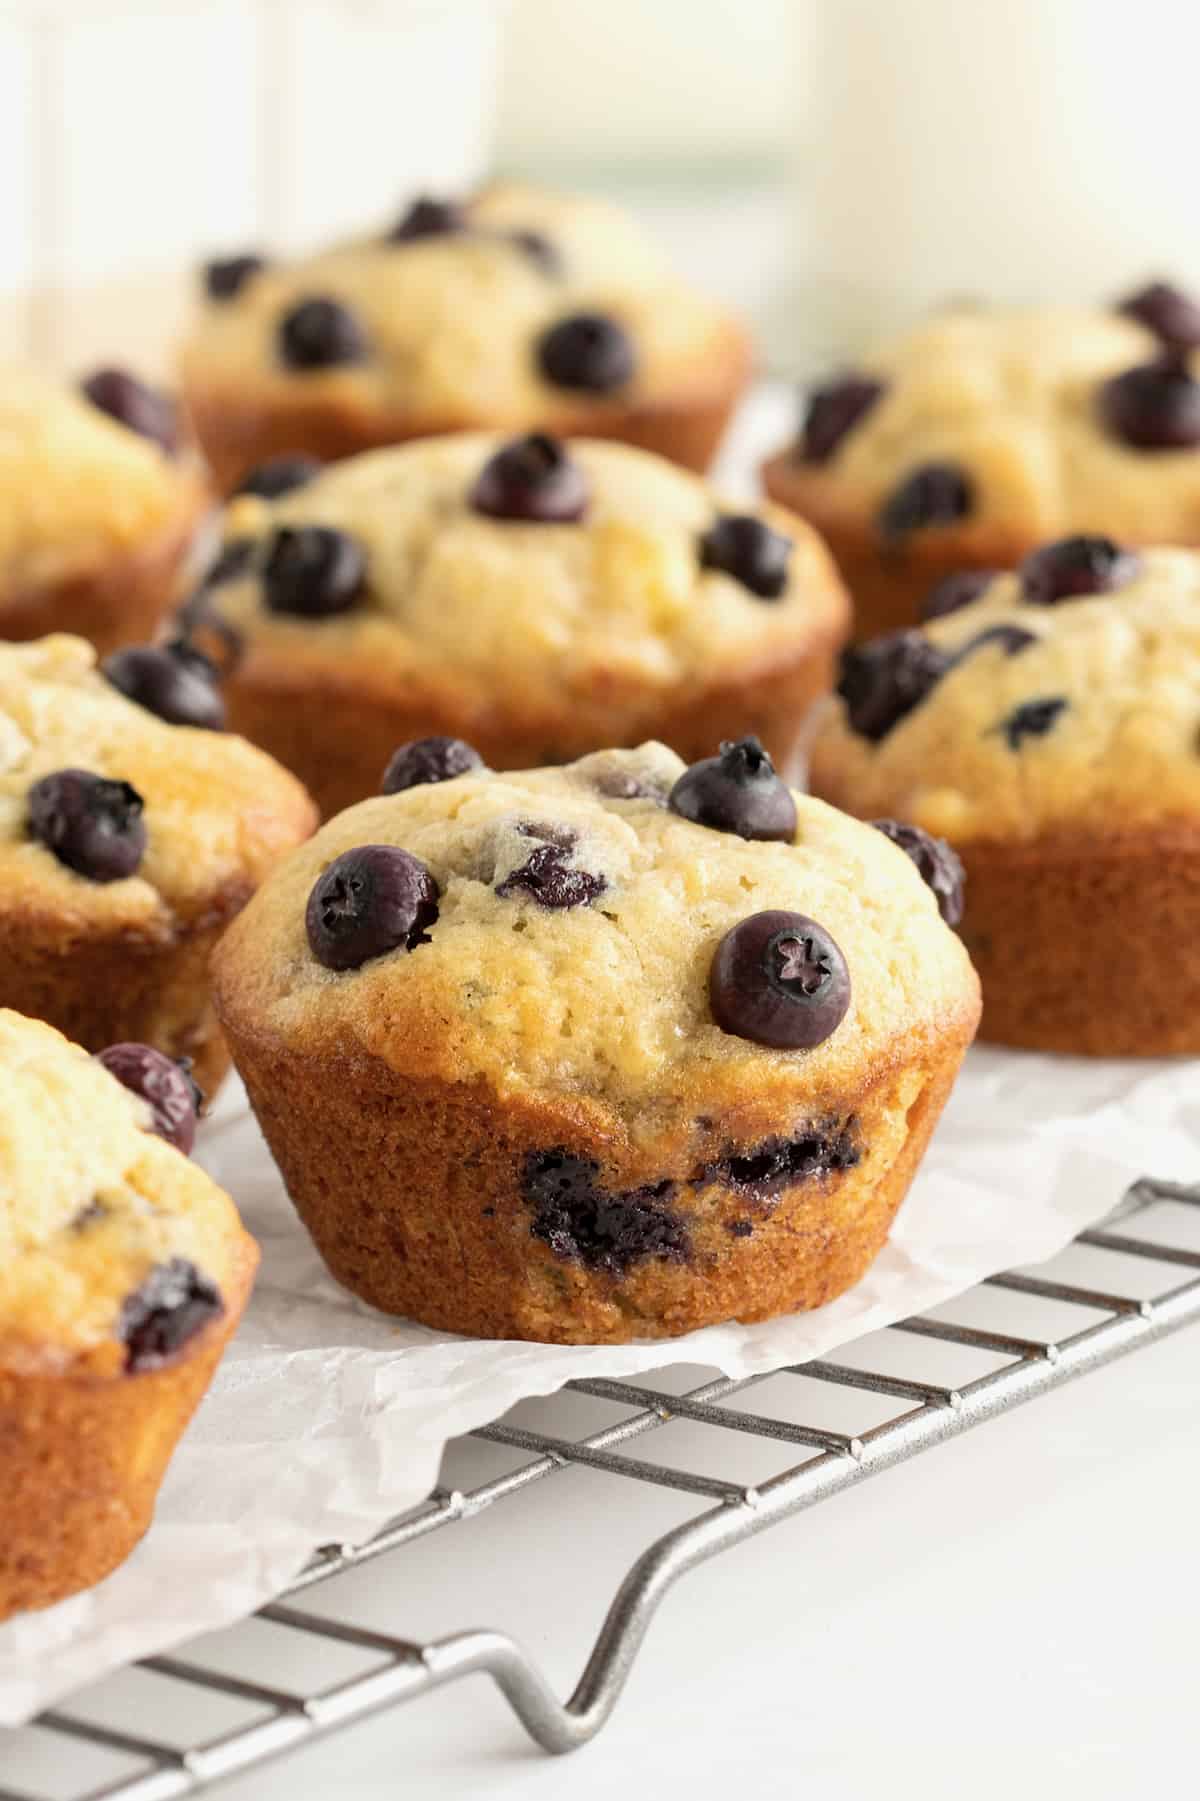 Banana Blueberry Muffins from The BakerMama